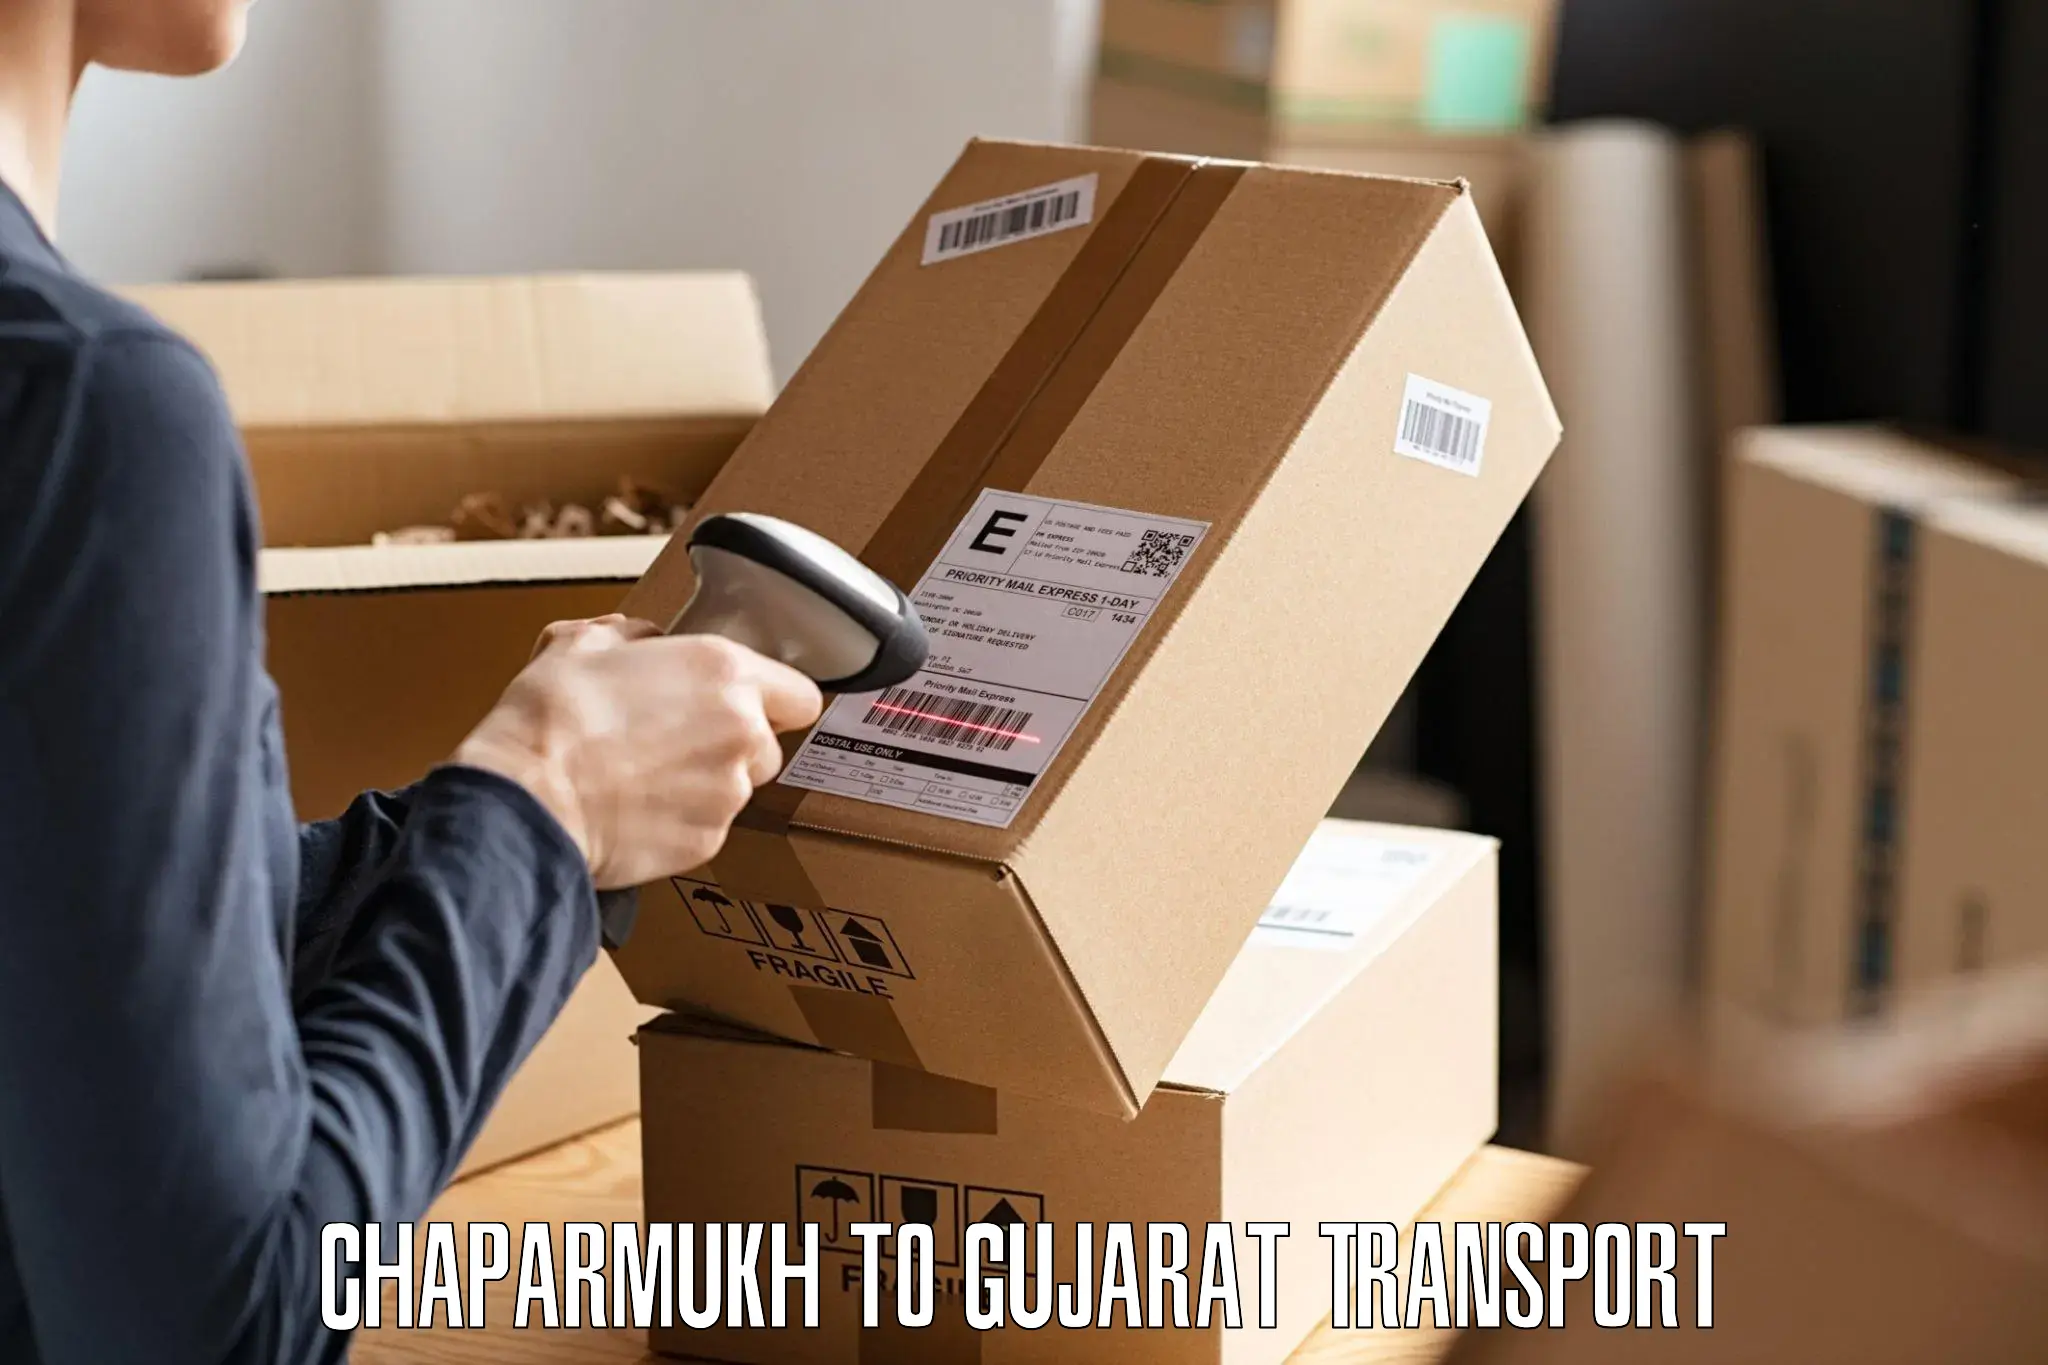 Express transport services in Chaparmukh to Jamnagar